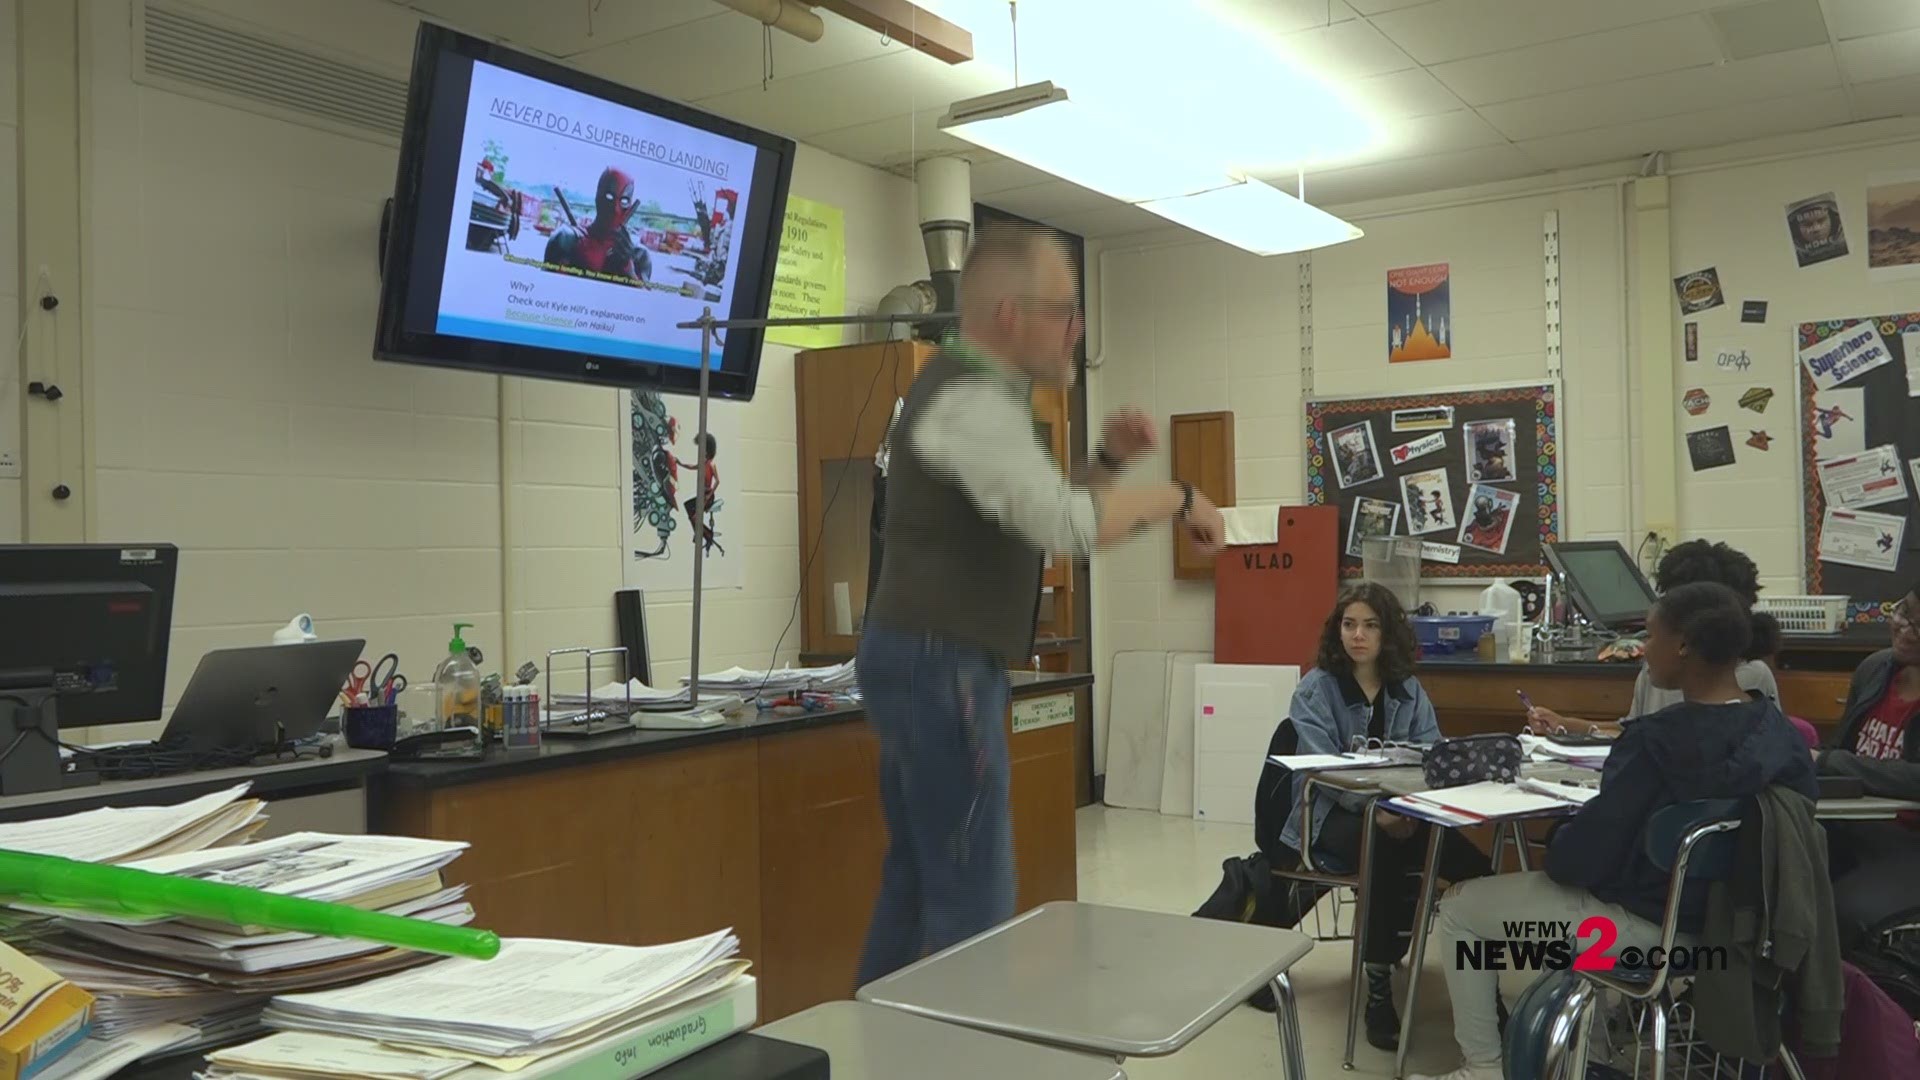 Without any context, walking into Matt Brady's classroom might make you think his lessons are only about superheroes, but when you look a little closer you realize he's a science teacher.